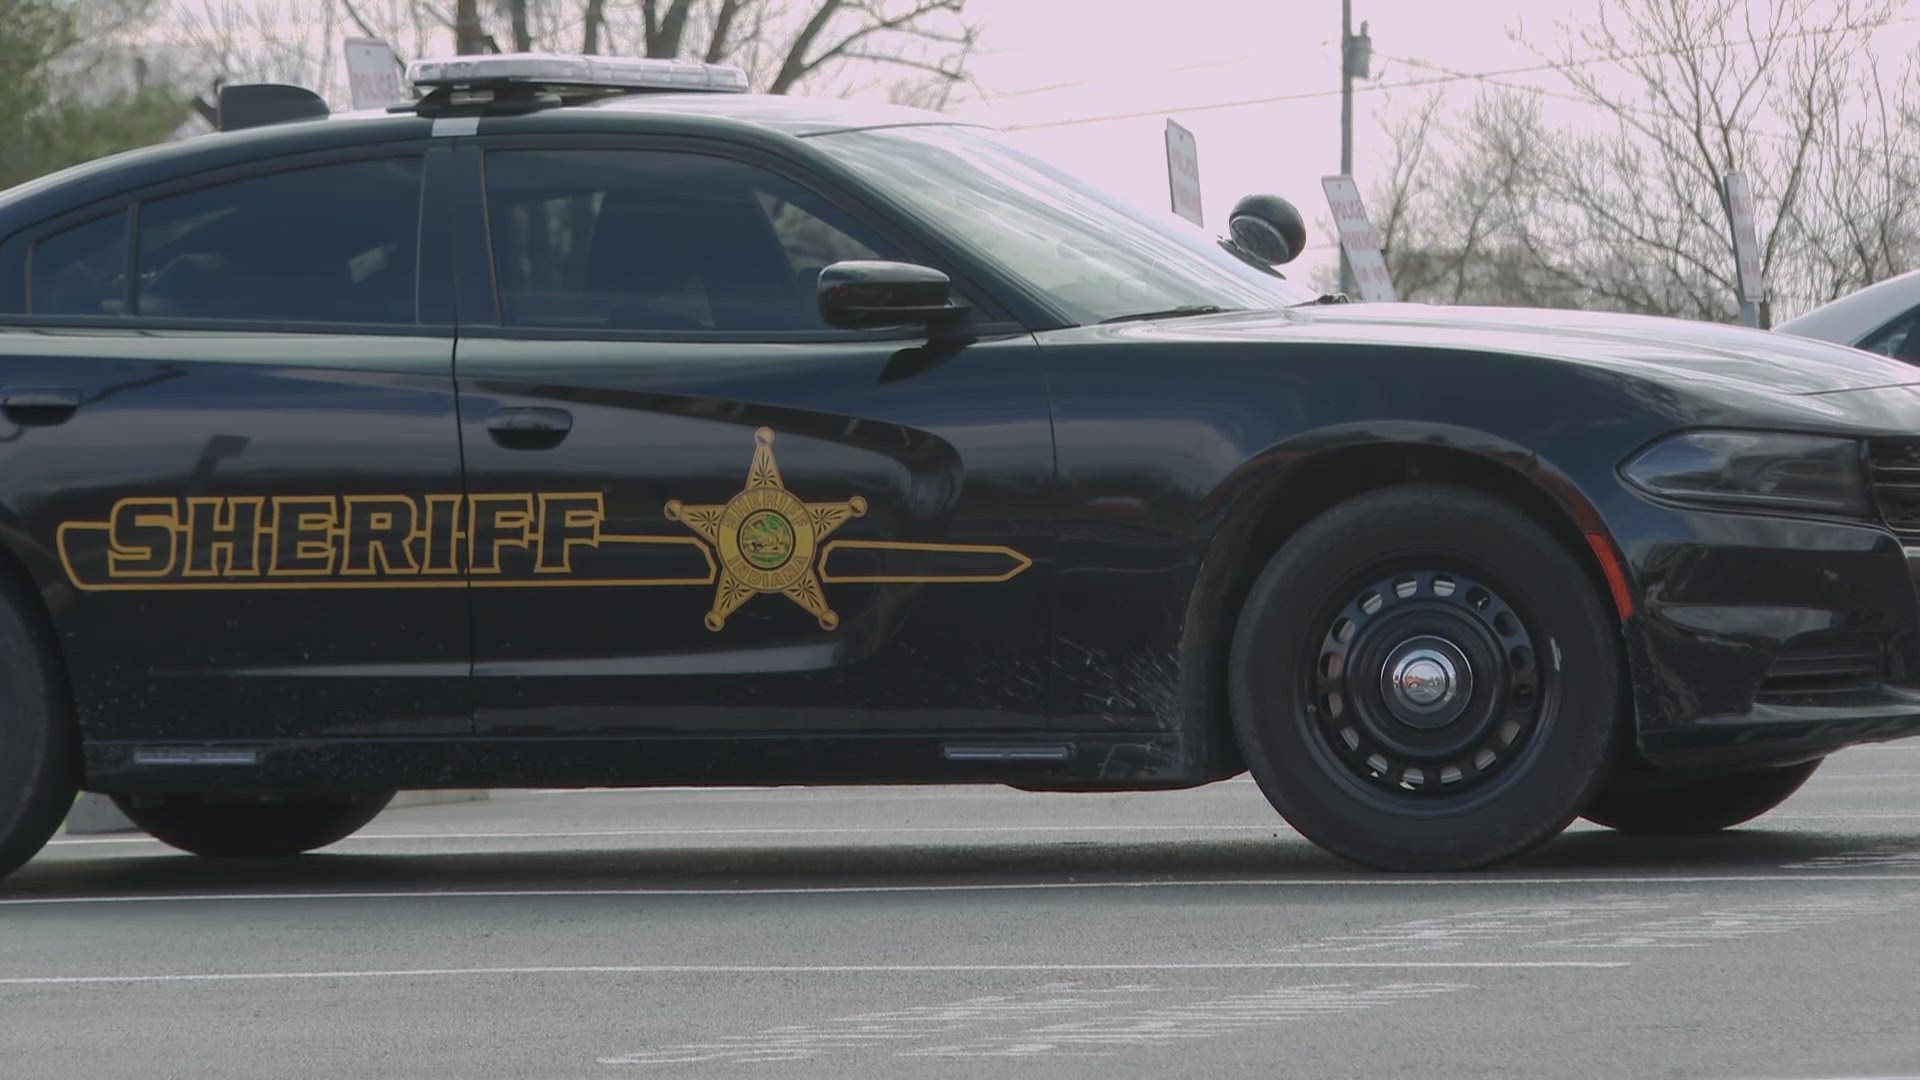 Staffing shortages has hit Washington County, leading it to make unprecedented changes. This is bringing questions of public safety to the forefront.